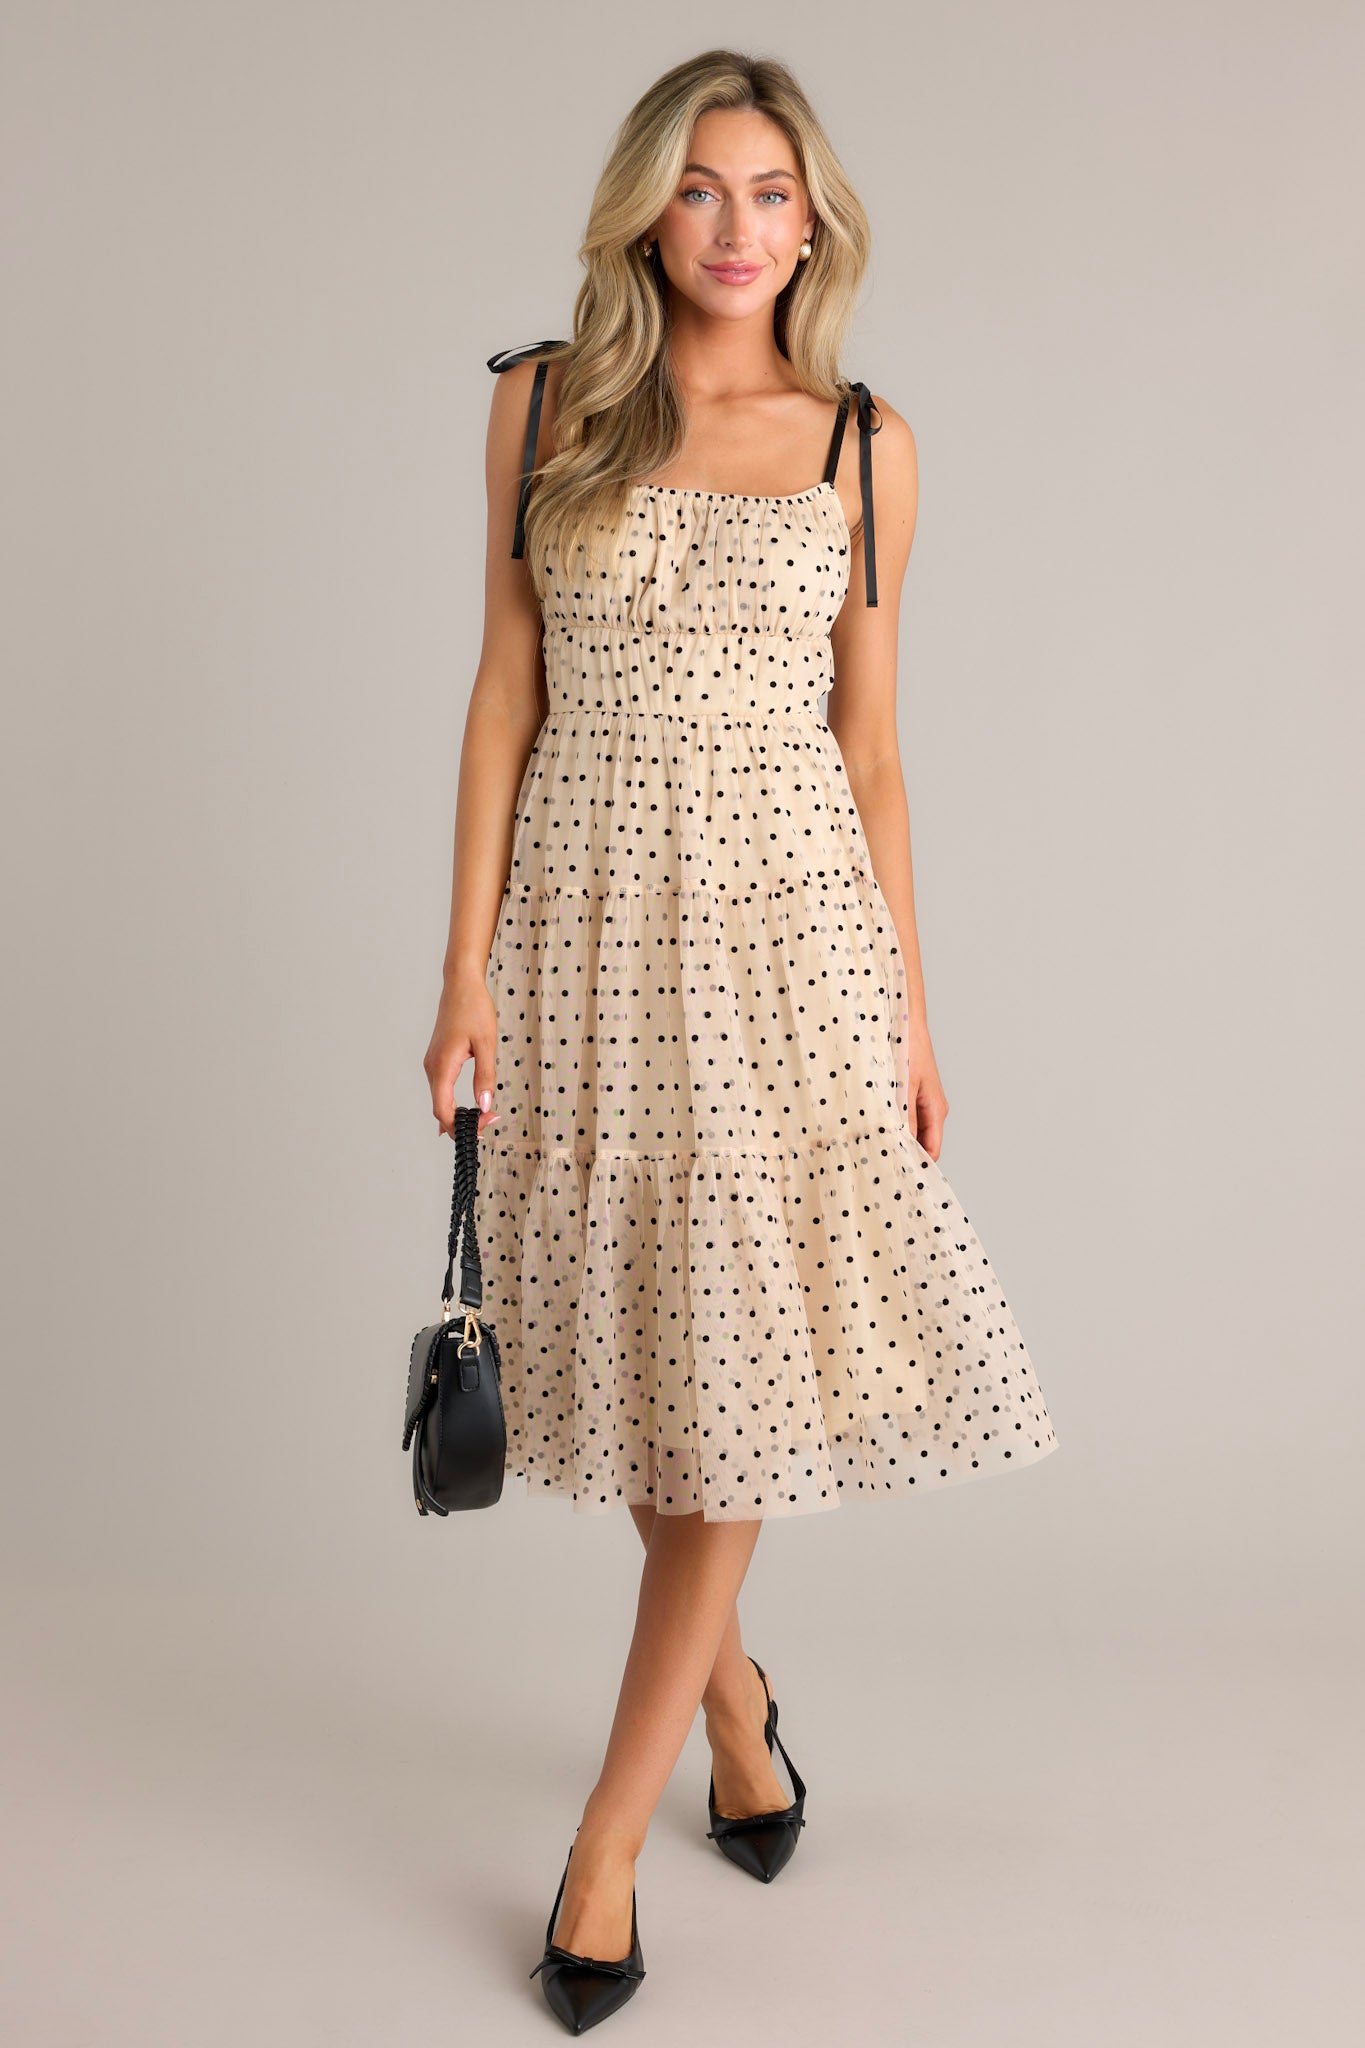 This beige midi dress features a square neckline, thin self-tie straps, an elastic waistline, tiers, black polka dots, and tulle.